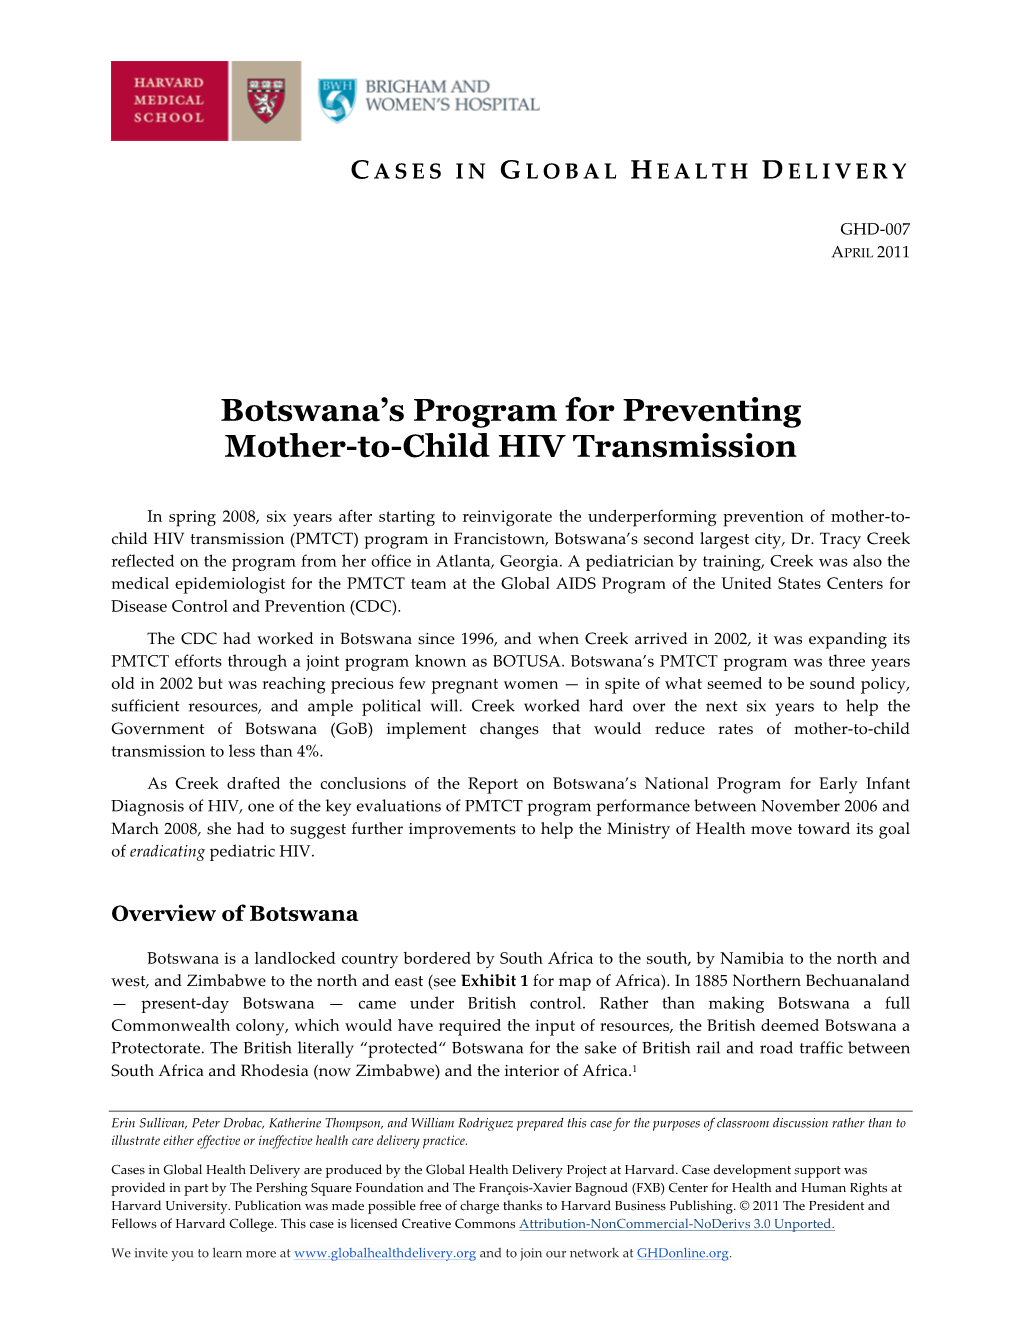 Download GHD-007 Botswana's Program for Preventing Mother-To